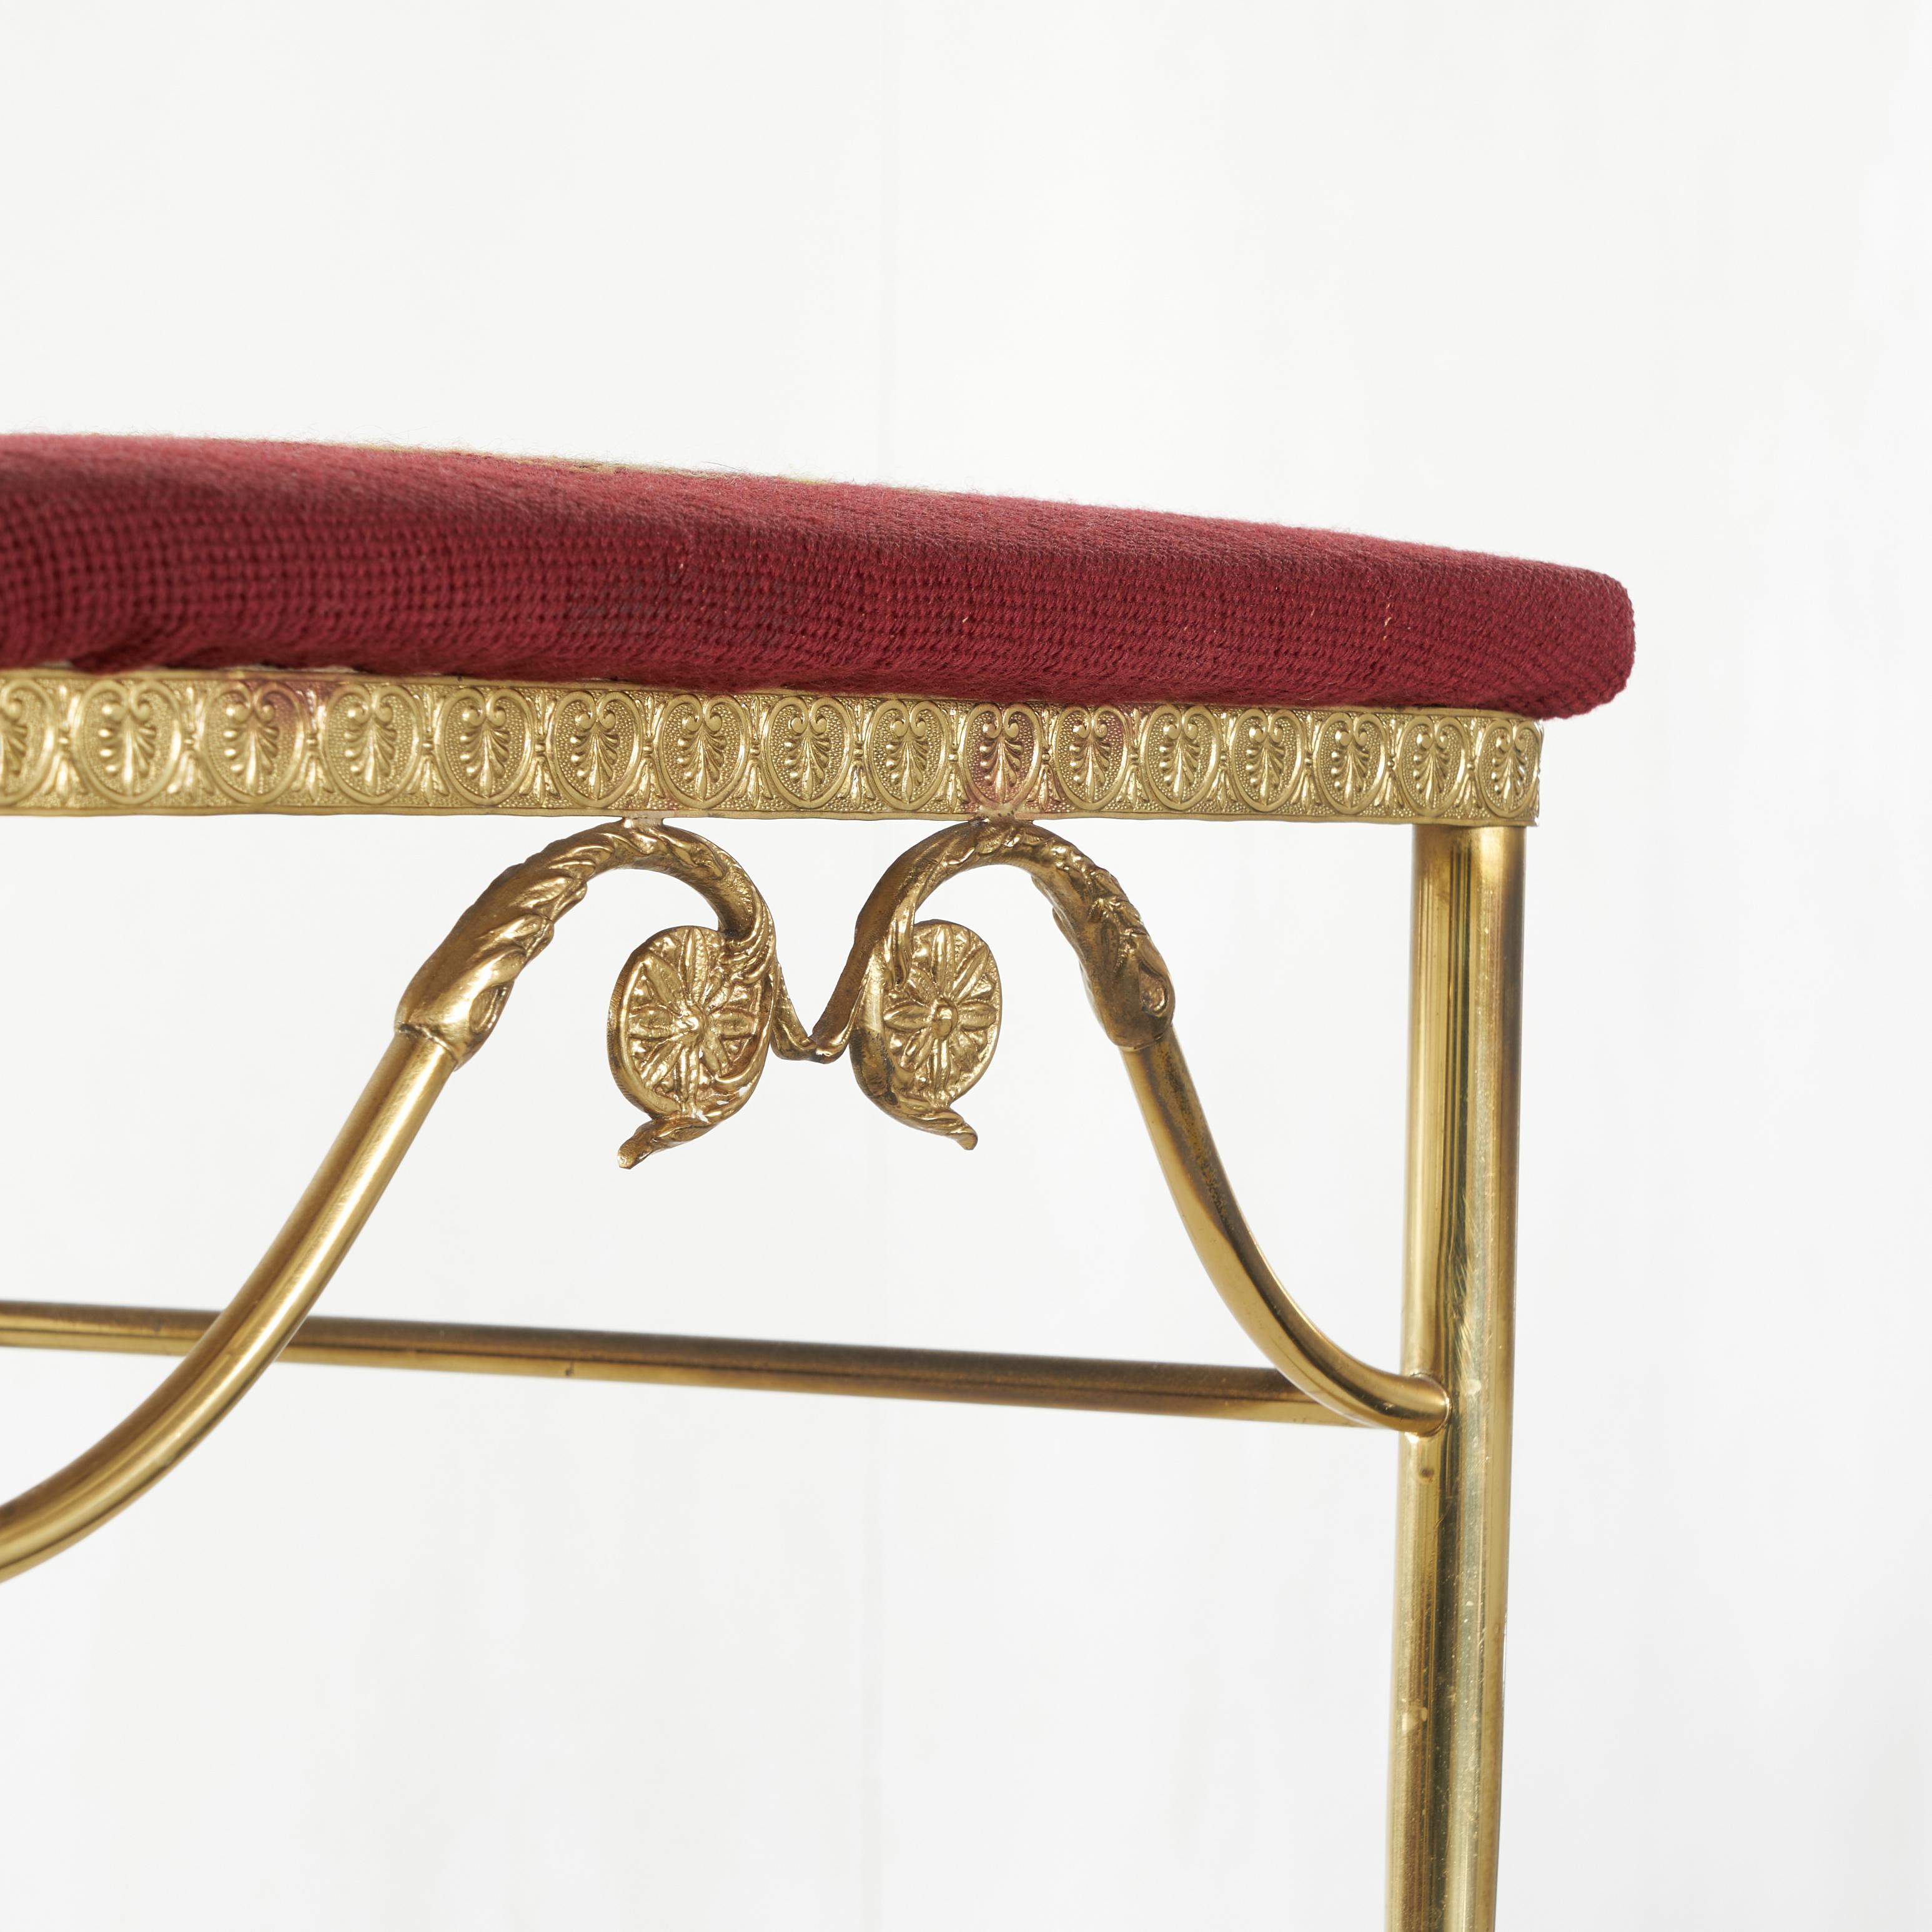 Hand-Crafted High Back Chiavari Chair in Brass and Embroidery, 1960s For Sale